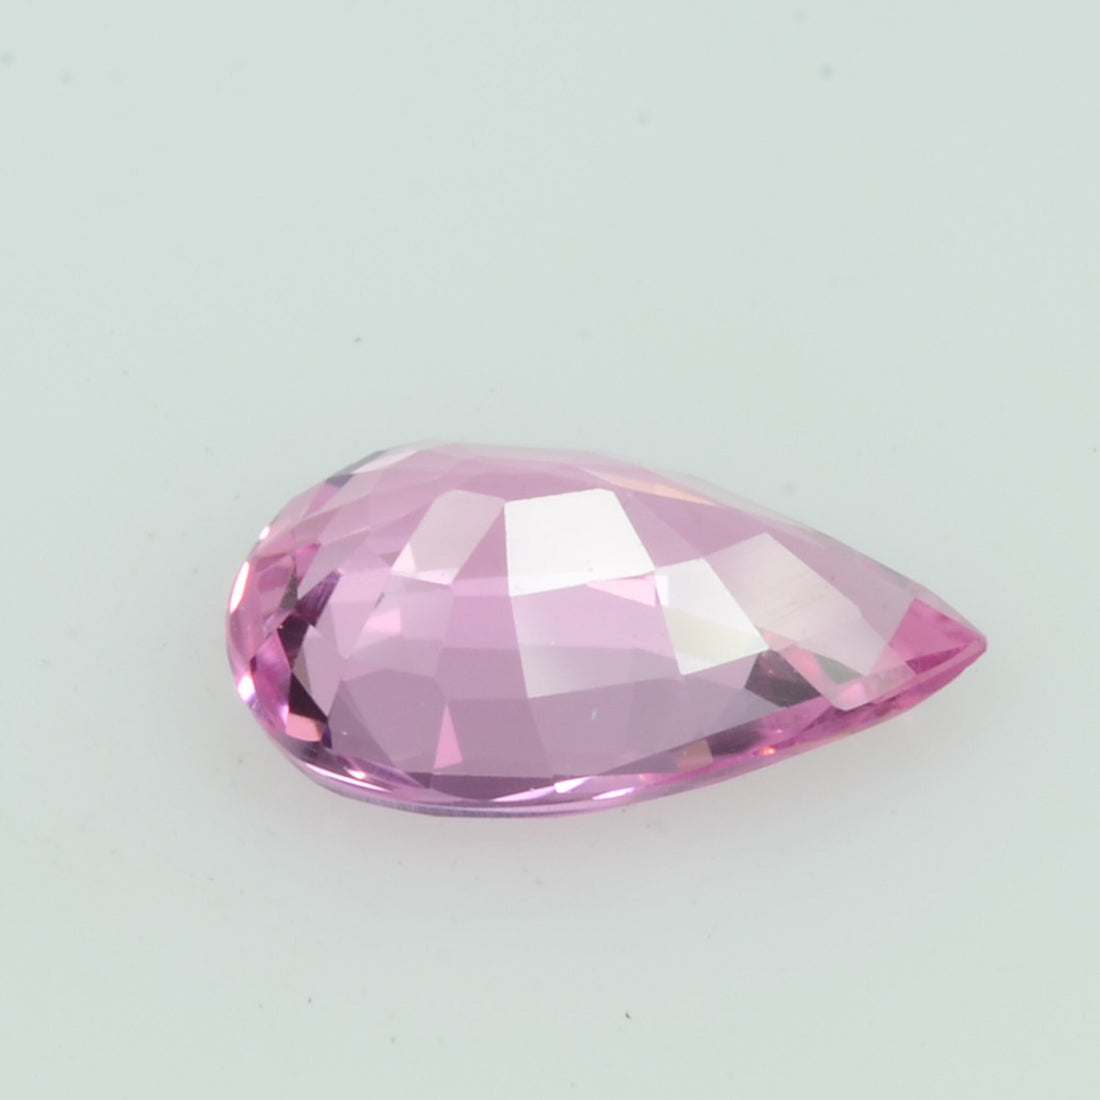 0.97 cts Natural Pink Sapphire Loose Gemstone Pear Cut